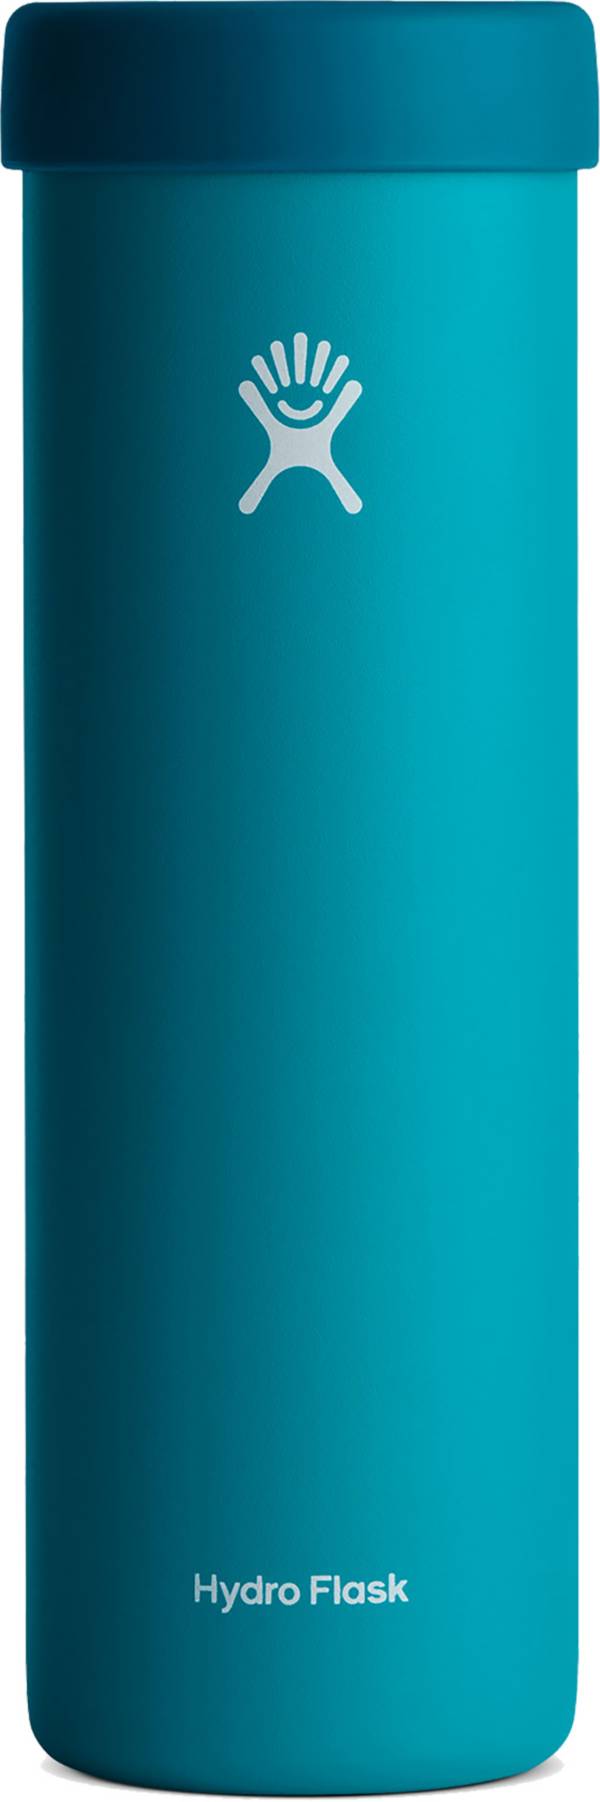 Hydro Flask Tandem Cooler Cup product image